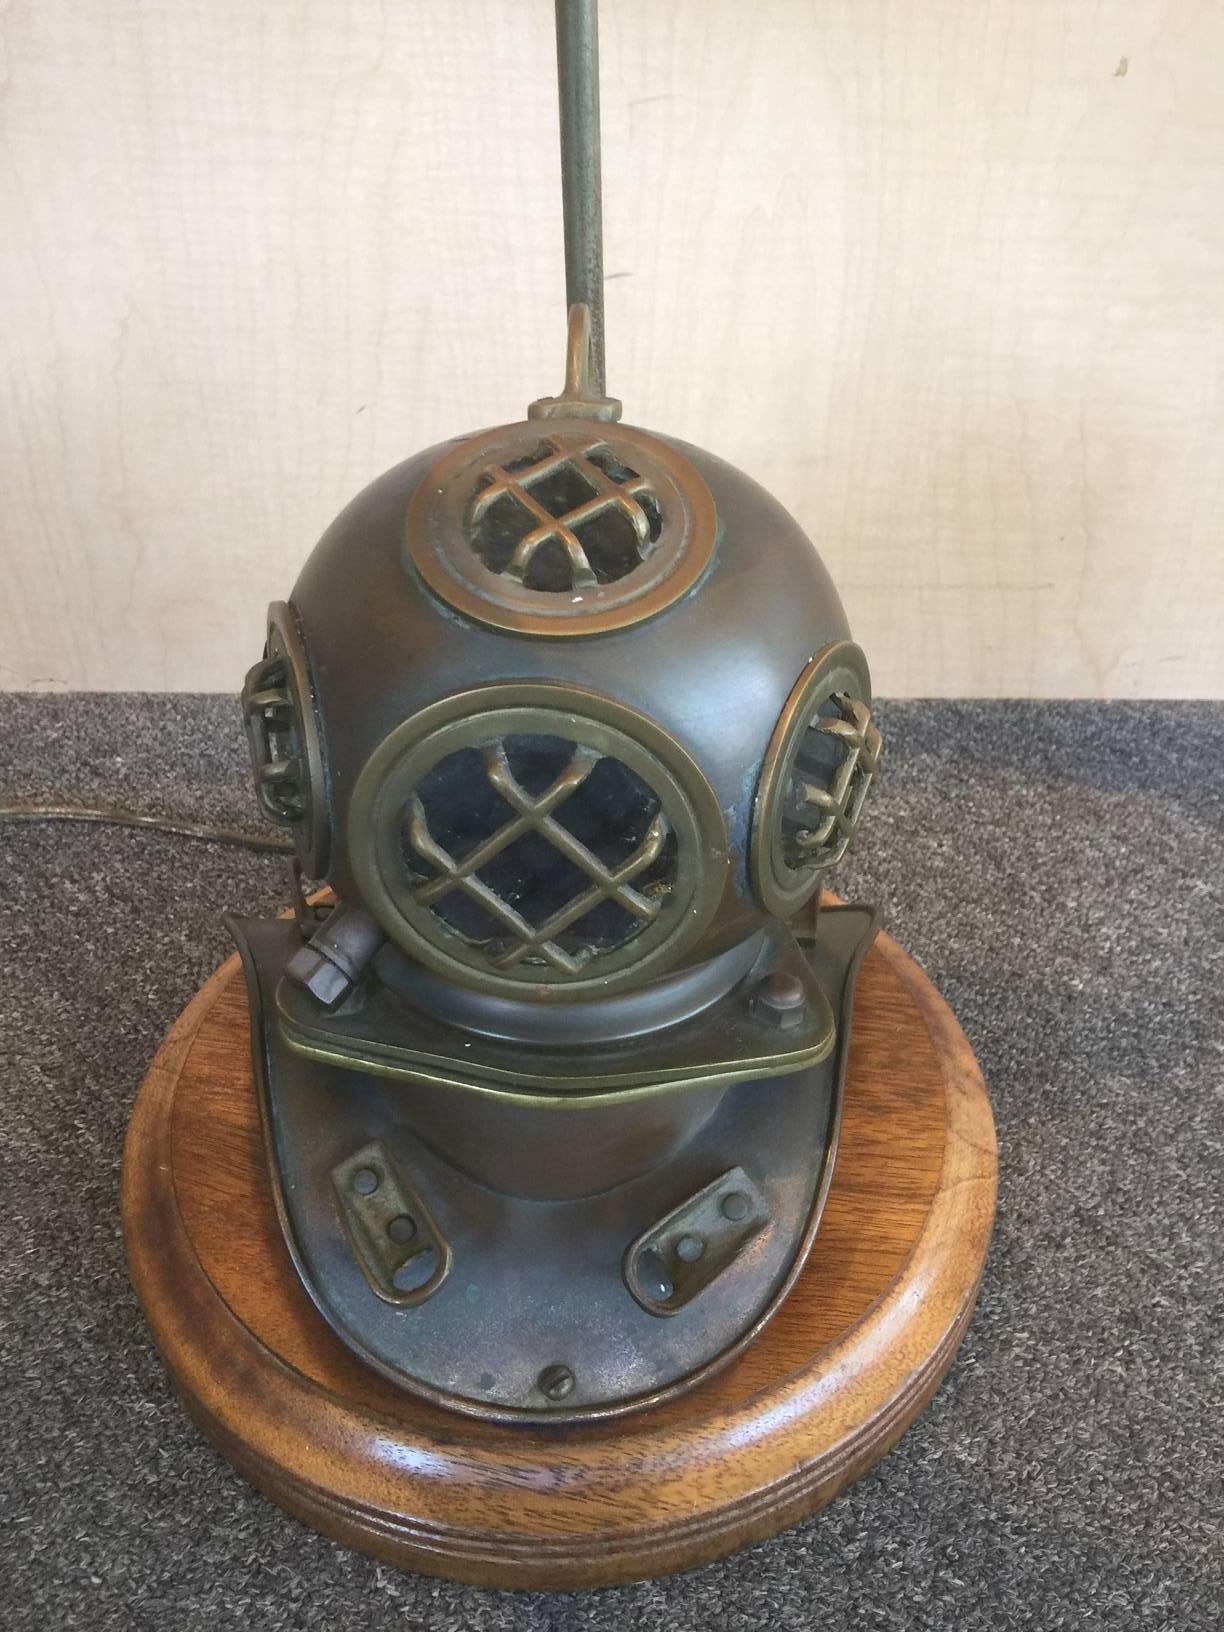 Very eclectic vintage nautical lamp with a brass divers helmet as the centerpiece. Helmet sits on a 12